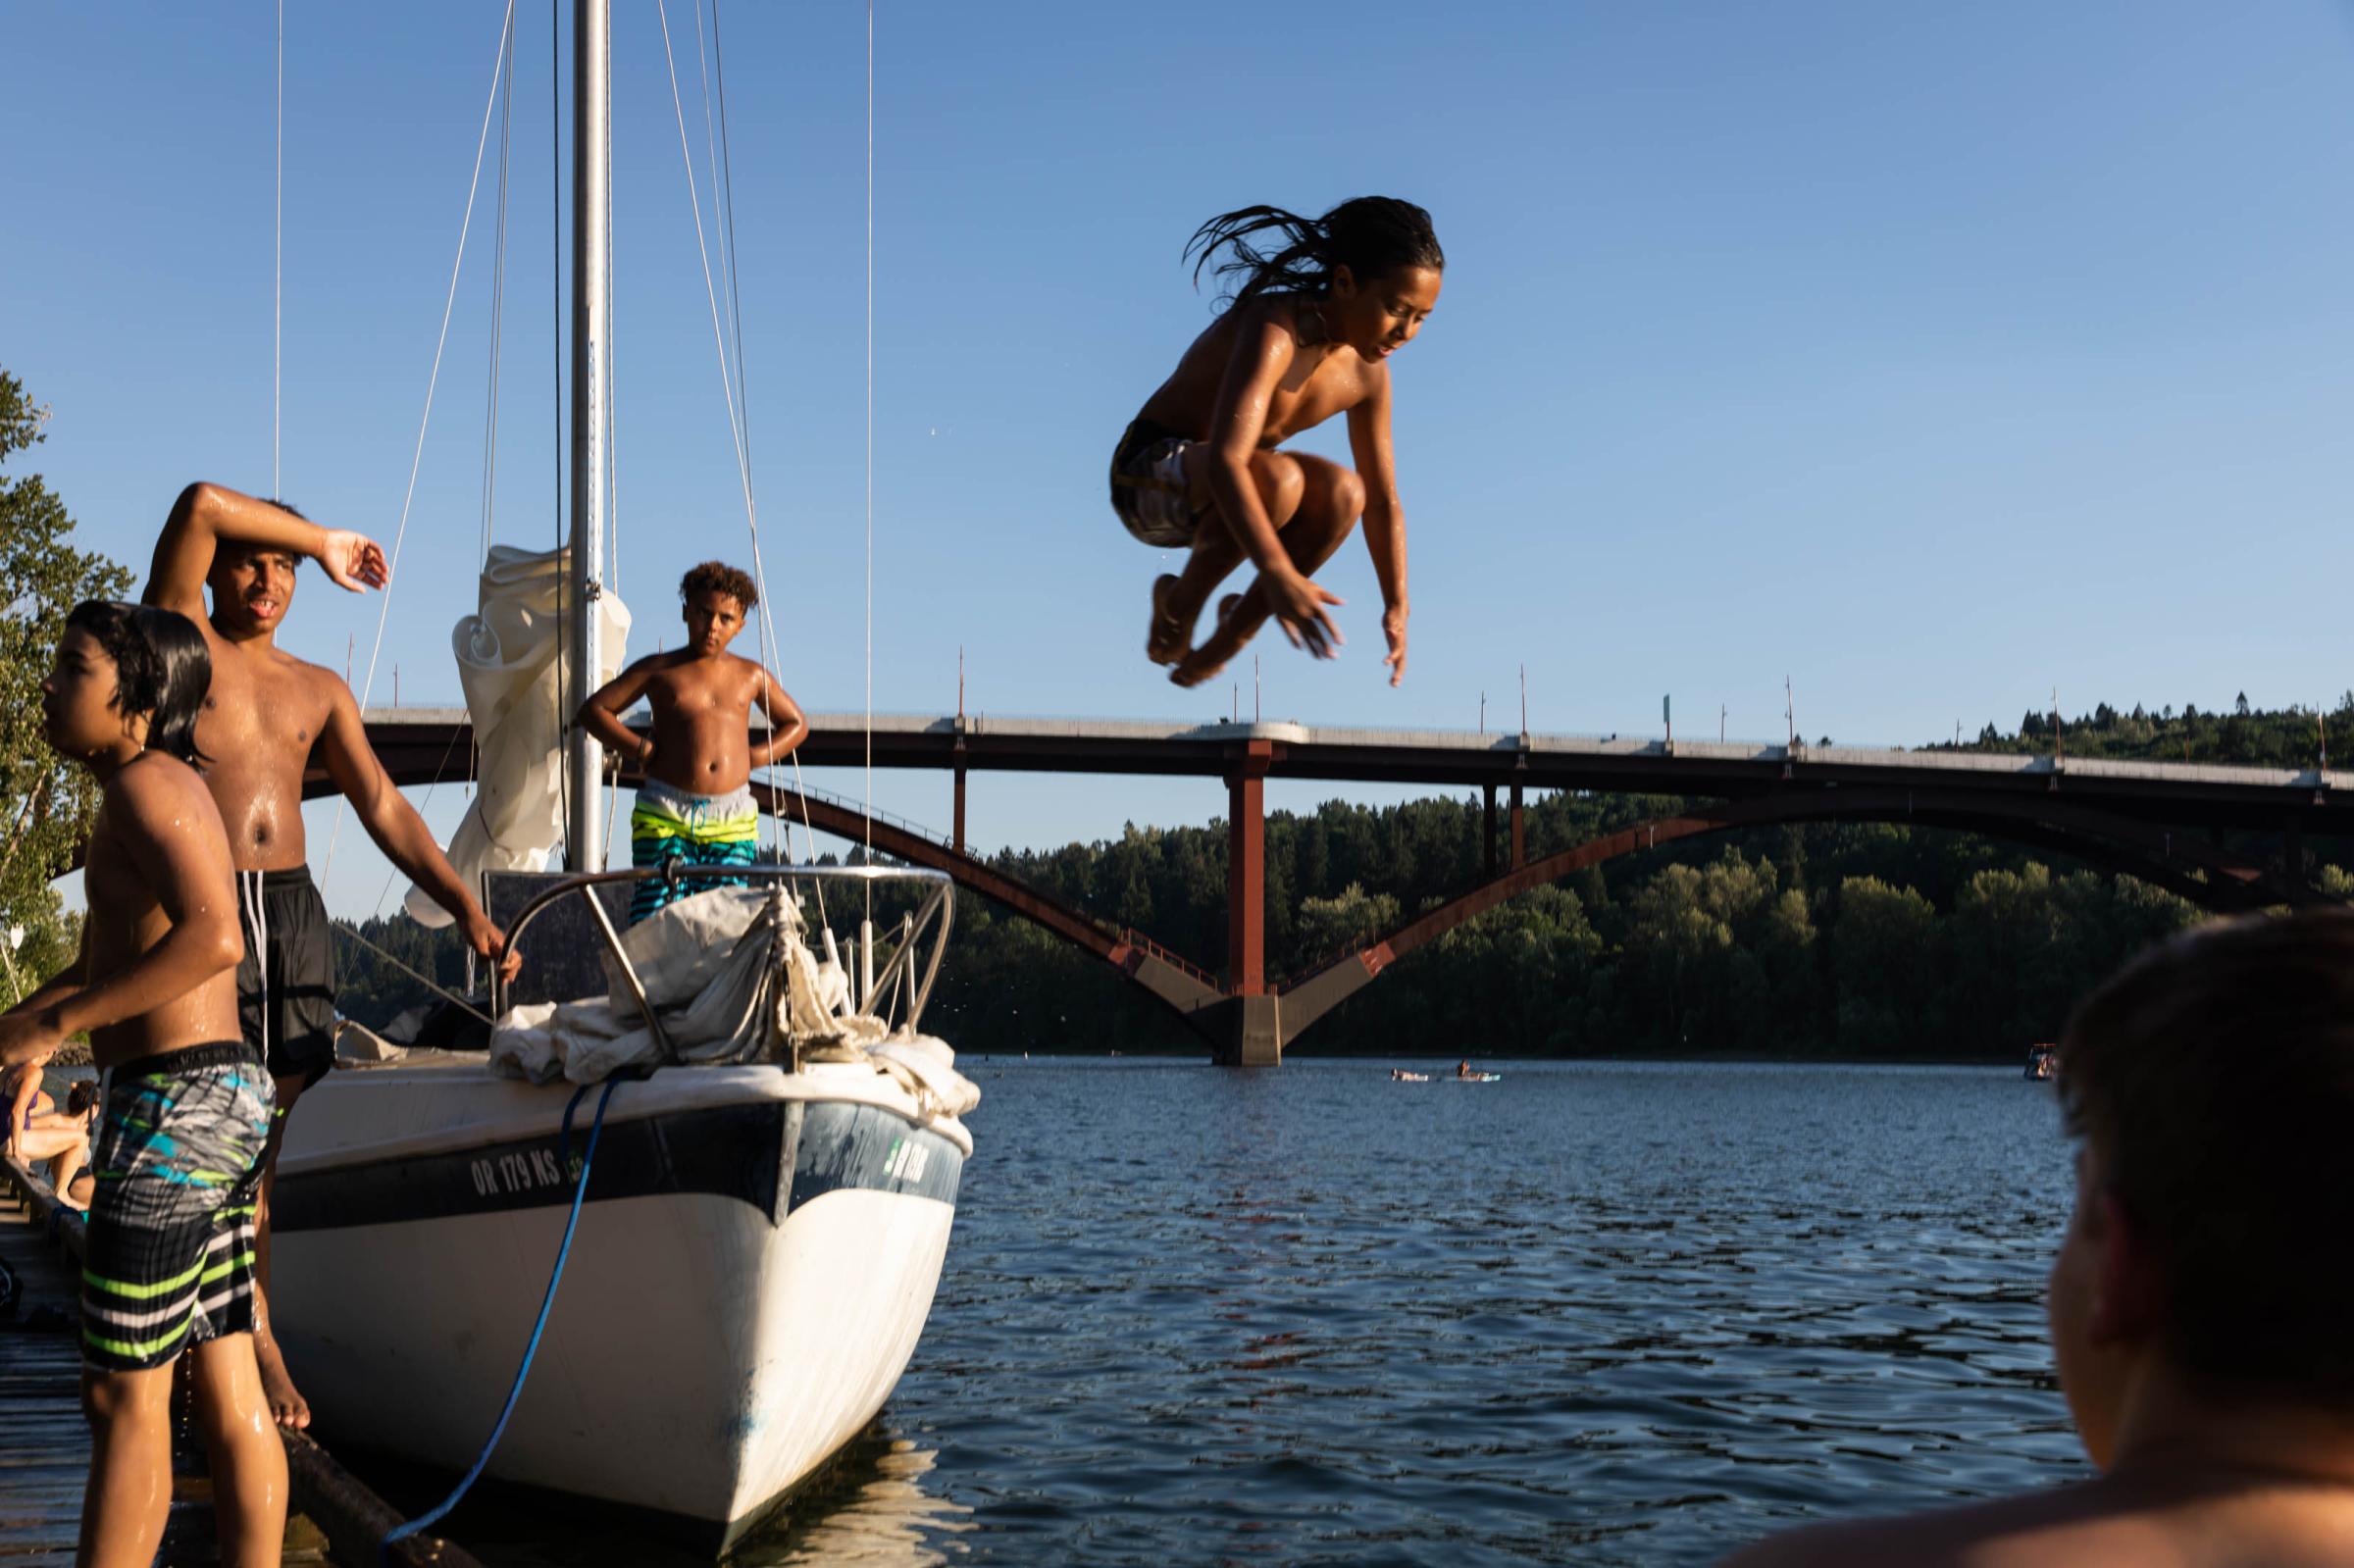 2021 in pictures - Surrounded by friends, a boy jumps into the Willamette River at Sellwood Riverfront Park in...